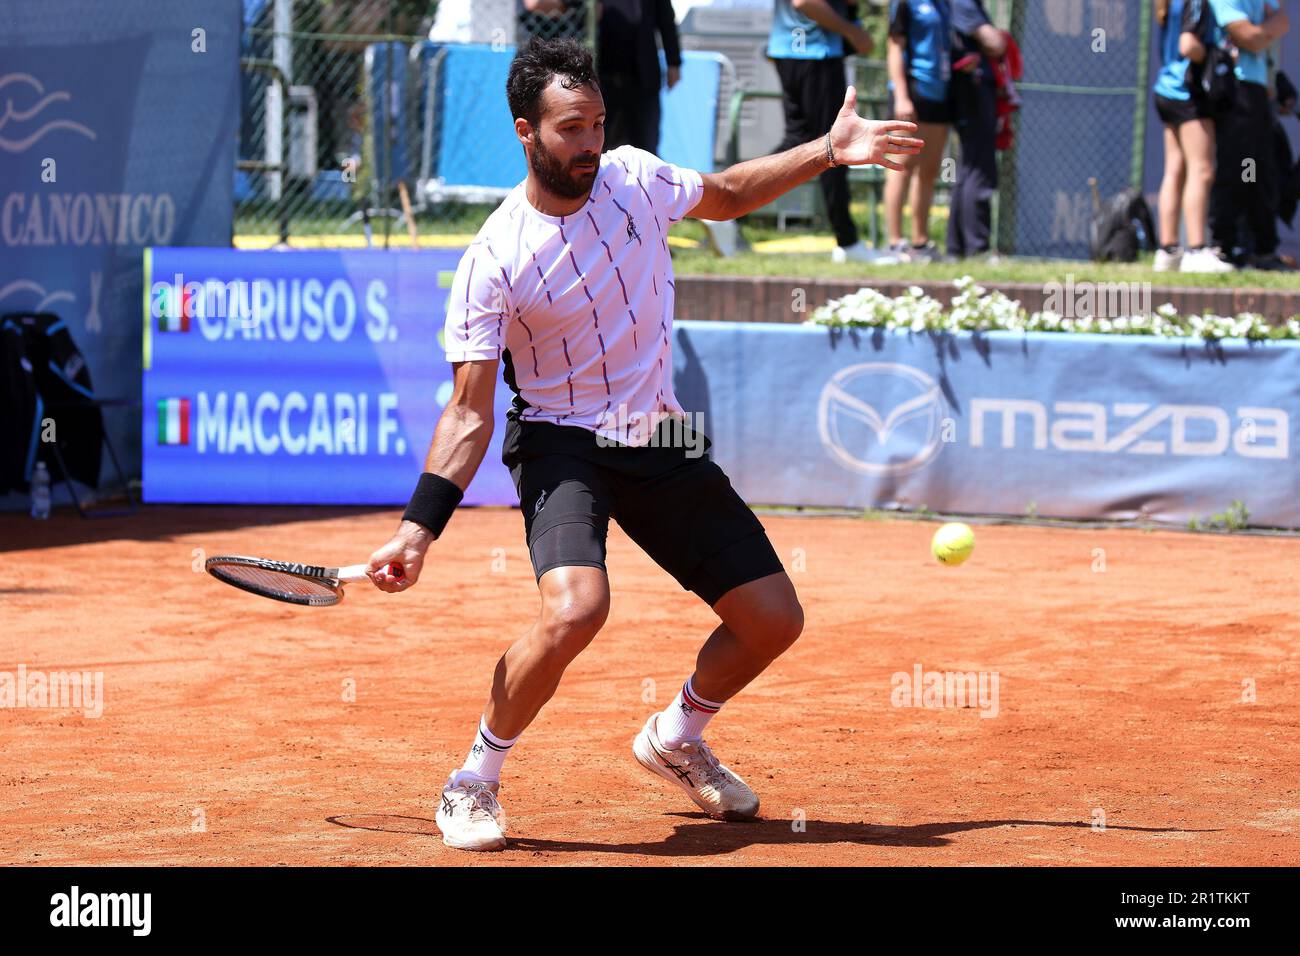 Turin, Italy. 15th May, 2023. Salvatore Caruso (Italy) during the match vs Federico Maccari (Italy) during 2023 Piemonte Open Intesa San Paolo, Tennis Internationals in Turin, Italy, May 15 2023 Credit: Independent Photo Agency/Alamy Live News Stock Photo